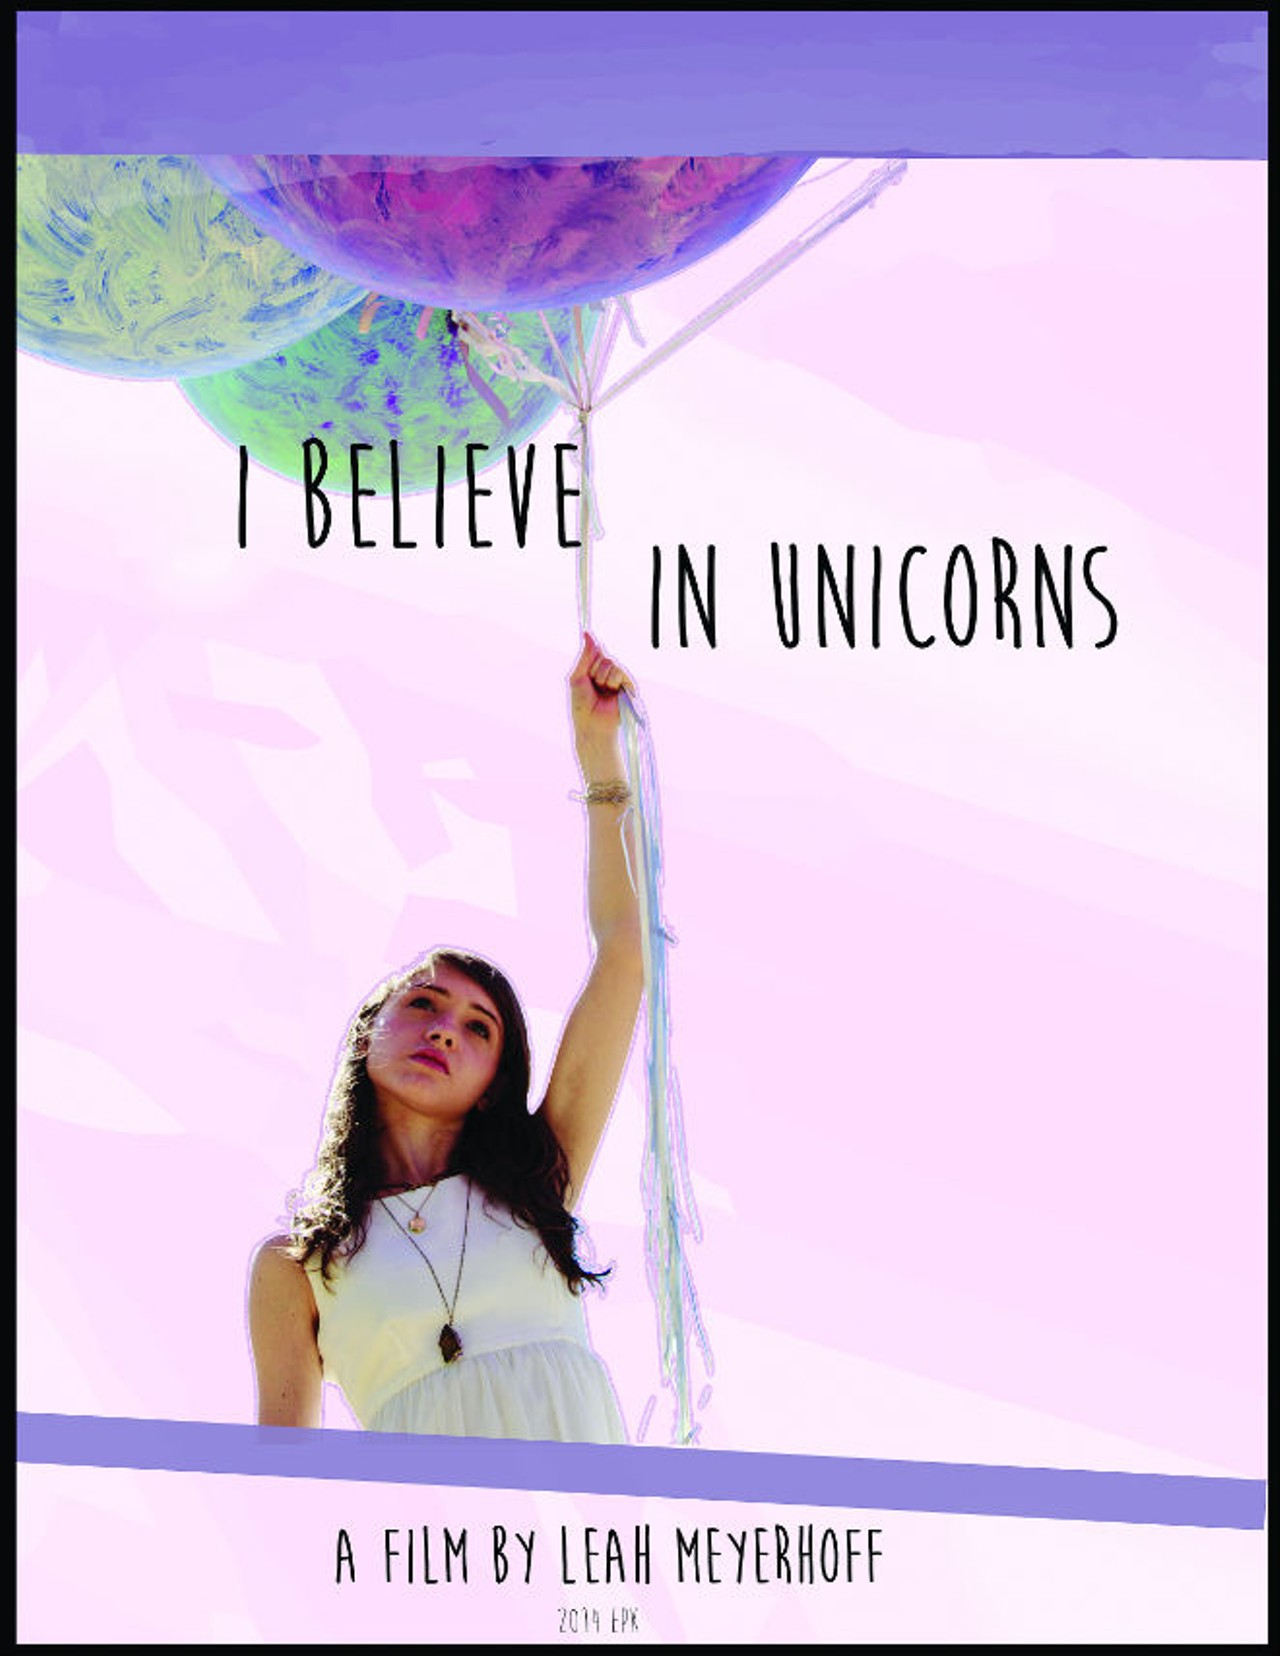 I Believe in Unicorns
??? (out of 5 stars)
Program: Narrative features
Leah Meyerhoff&#146;s debut feature ought to be stamped with an expiration date, it&#146;s so fresh and sweet. Or maybe it should come with an age limit, because I&#146;m not sure anyone over 30 is capable of being lulled by this montage of dreamy girliness enough to ignore the predictable plot.
Sixteen-year-old Davina (Natalia Dyer, looking maybe 13) floats in a mental fairy-tale land of cupcakes and tutus and glitter and, yes, unicorns until she meets the cutest skater boy, Sterling (Peter Vack), and it&#146;s young love, true love, until they run away together and things go bad on the road. What&#146;s frustrating about the after-school-special feel of the narrative is that there&#146;s meatier conflict to be dug into. Davina&#146;s excursions into cloud-cuckoo-land are understandable when contrasted with her day-to-day life: Her mother is badly disabled with multiple sclerosis and confined to a wheelchair; when she falls out, it&#146;s up to this 86-pound teen to deal with it, because her father is out of the picture. (The filmmaker&#146;s mother, who is in fact wheelchair-bound with MS, plays Davina&#146;s mother.)
There&#146;s nothing wrong with a timeworn plot, but scenes between Dyer and Vack feel like acting exercises carried out with the thinnest of improv skills. The dream sequences and montages of Davina taking pictures or wandering Northern California with Sterling capture her emotional life beautifully &#150; the images of cartwheels and lace dresses and stuffed animals are nothing new to anyone who&#146;s seen Tumblr, yes, but they&#146;re quite skillfully executed. Meyerhoff shot Unicorns on film &#150; an extreme rarity today, and in fact she used some of the last 16 mm Fuji film stock ever manufactured &#150; lending the movie exactly the hazy, washed-out, glinty-squinty atmosphere it requires. Her manipulation of the look of the film is masterful.
Meyerhoff has said that the plot is quasi-autobiographical; almost any woman could tell a story like this one from her teenage years, and that&#146;s both its weakness and its strength. Unicorns is a true love-it-or-hate-it, impossible to rate &#150; some viewers will adorn it with five sequin-covered stars, and others will give it one big eye-roll. If you want a warm bubble bath of Rookie-ready daydreams, then the trite story won&#146;t matter &#150; it&#146;s just the framework for the pictures, like a fashion-mag editorial spread. But if feeling like you&#146;ve seen. This. Movie. A hundred times already outweighs your enjoyment of the scenery, best to steer clear. &#150; Jessica Bryce Young